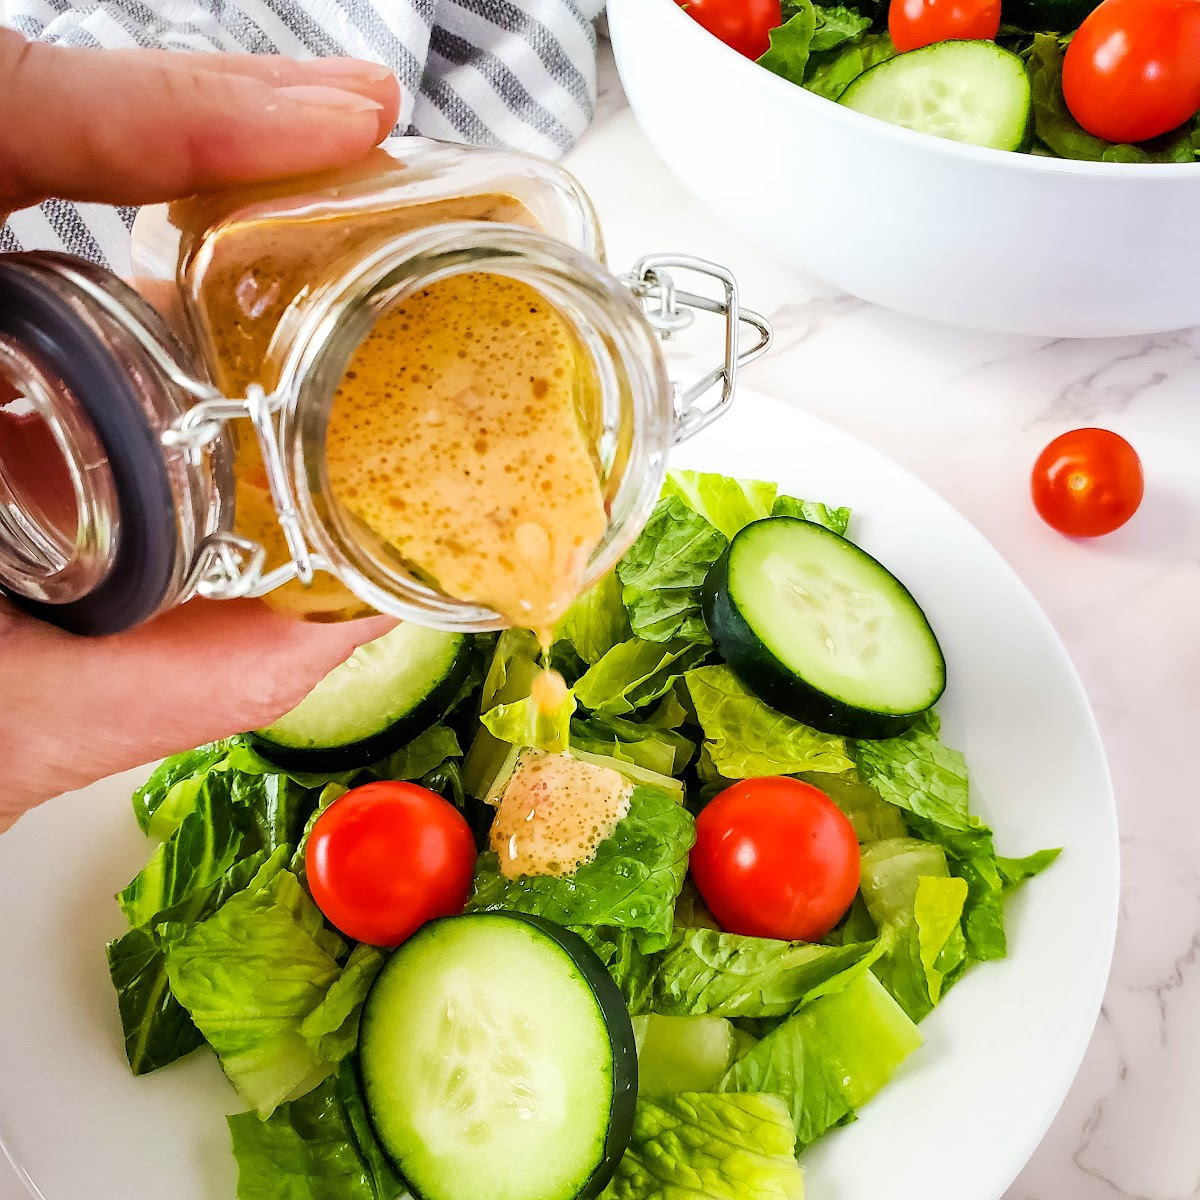 feature image of homemade dressing over salad